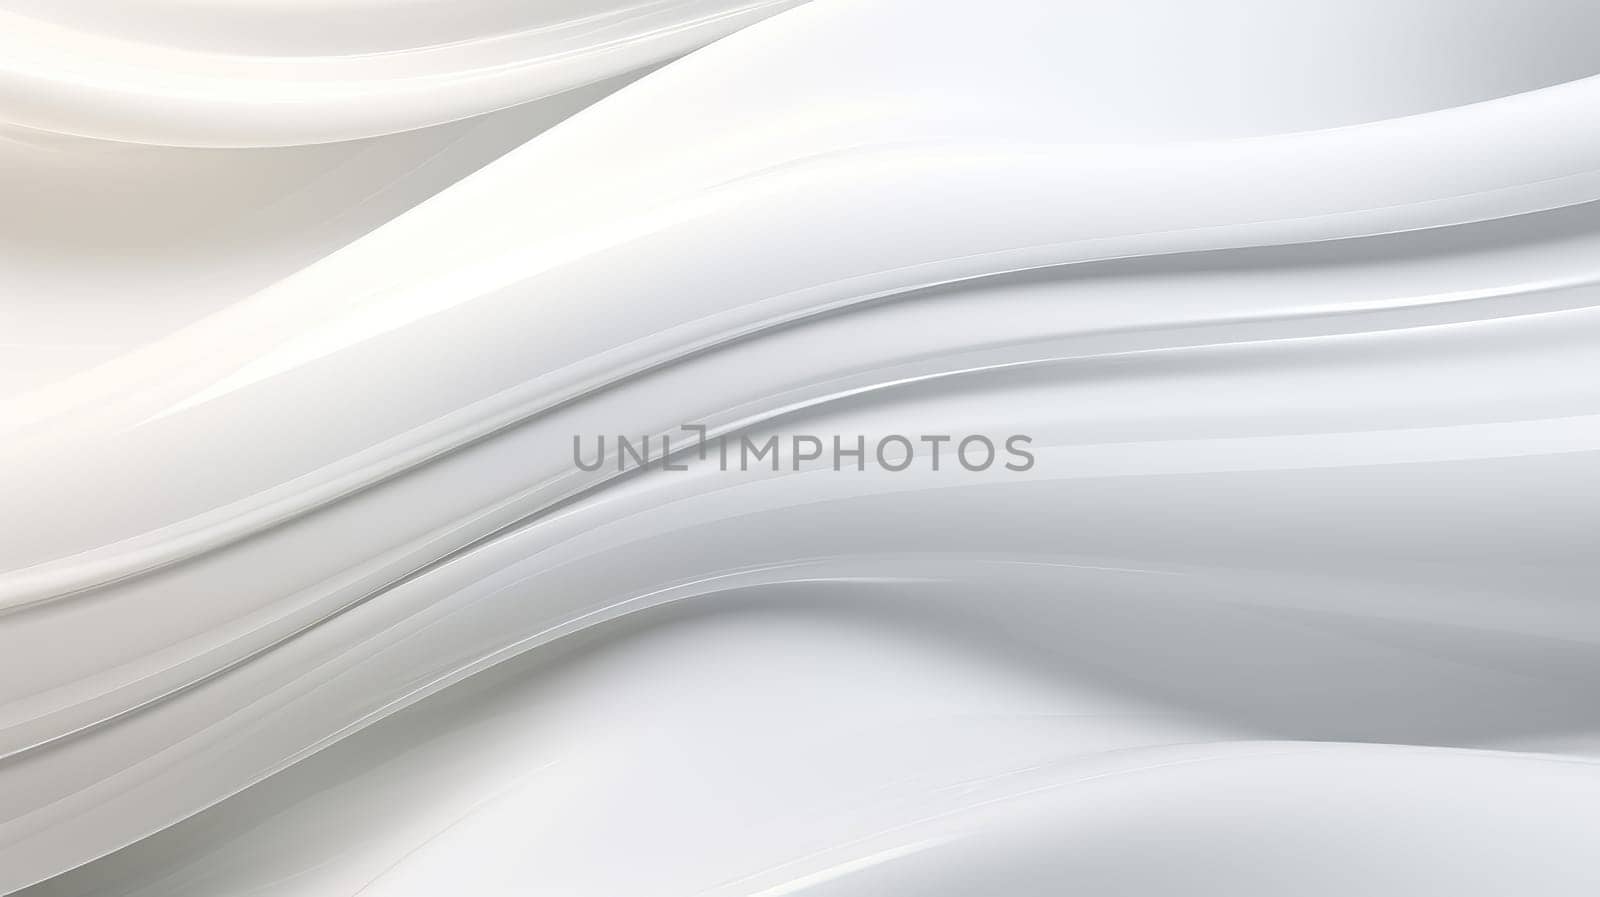 Beautiful luxury 3D modern abstract neon white light background composed of waves with light digital effect